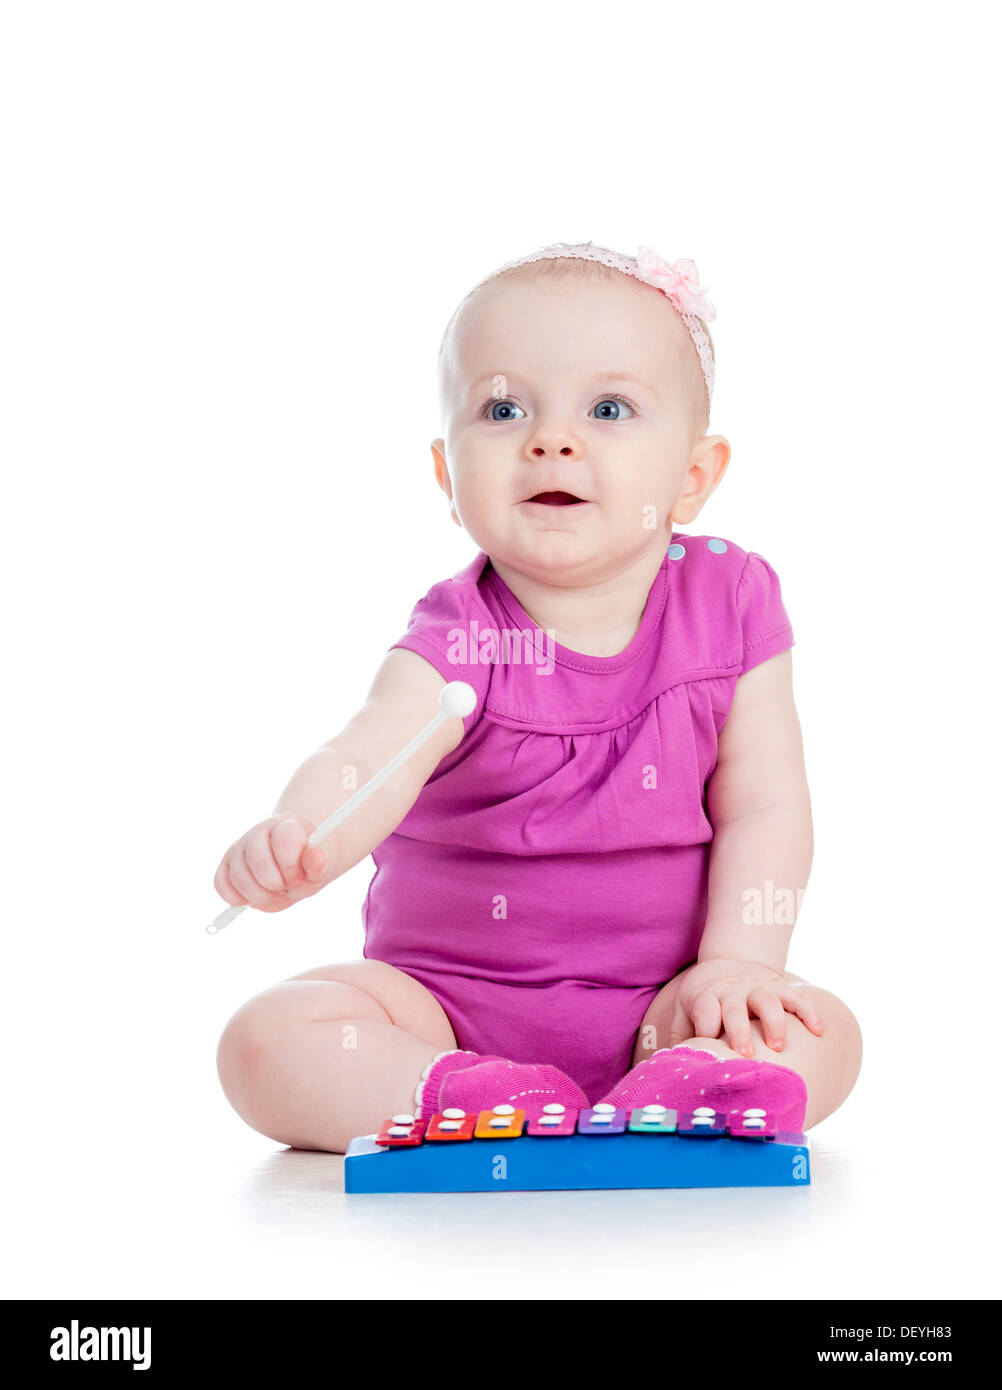 cute girl baby playing with musical toy Stock Photo